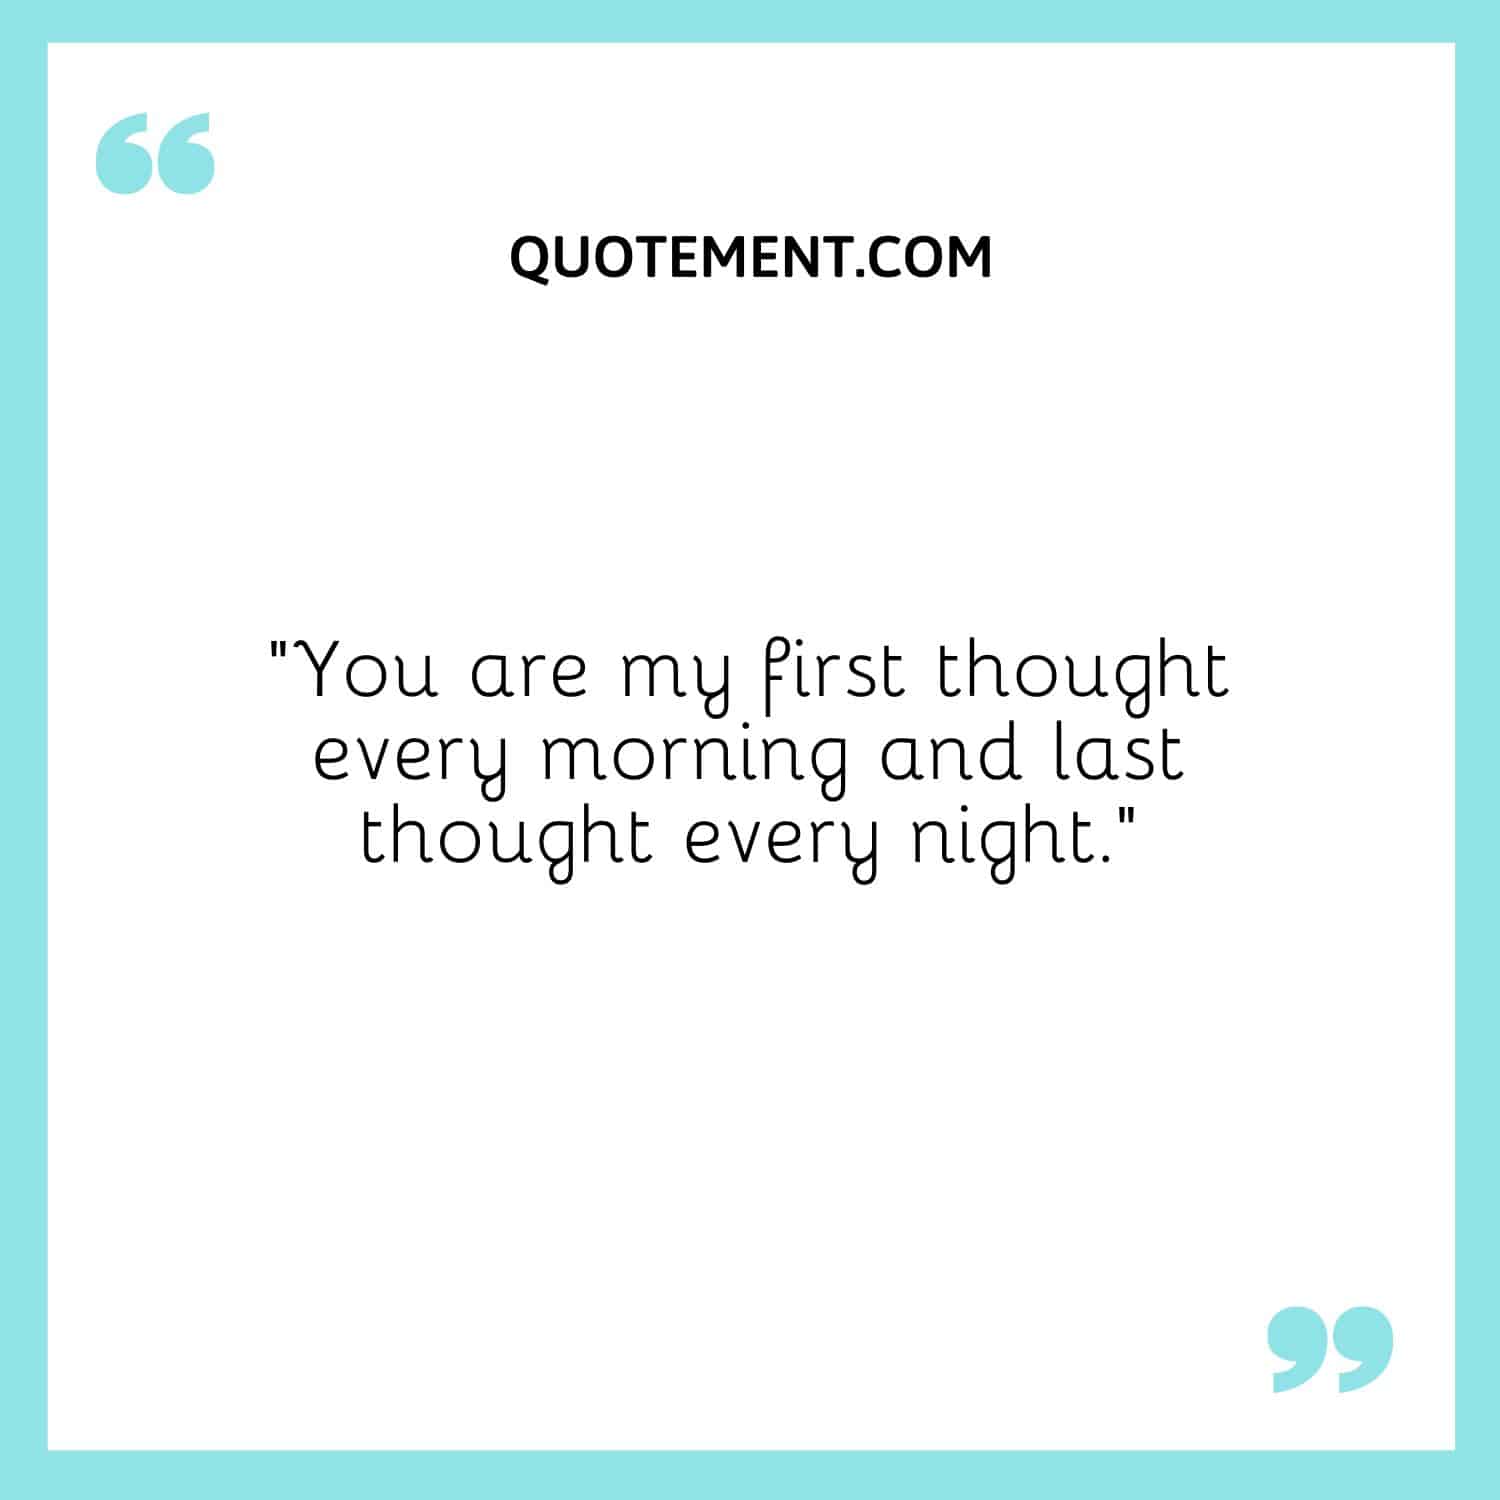 You are my first thought every morning and last thought every night